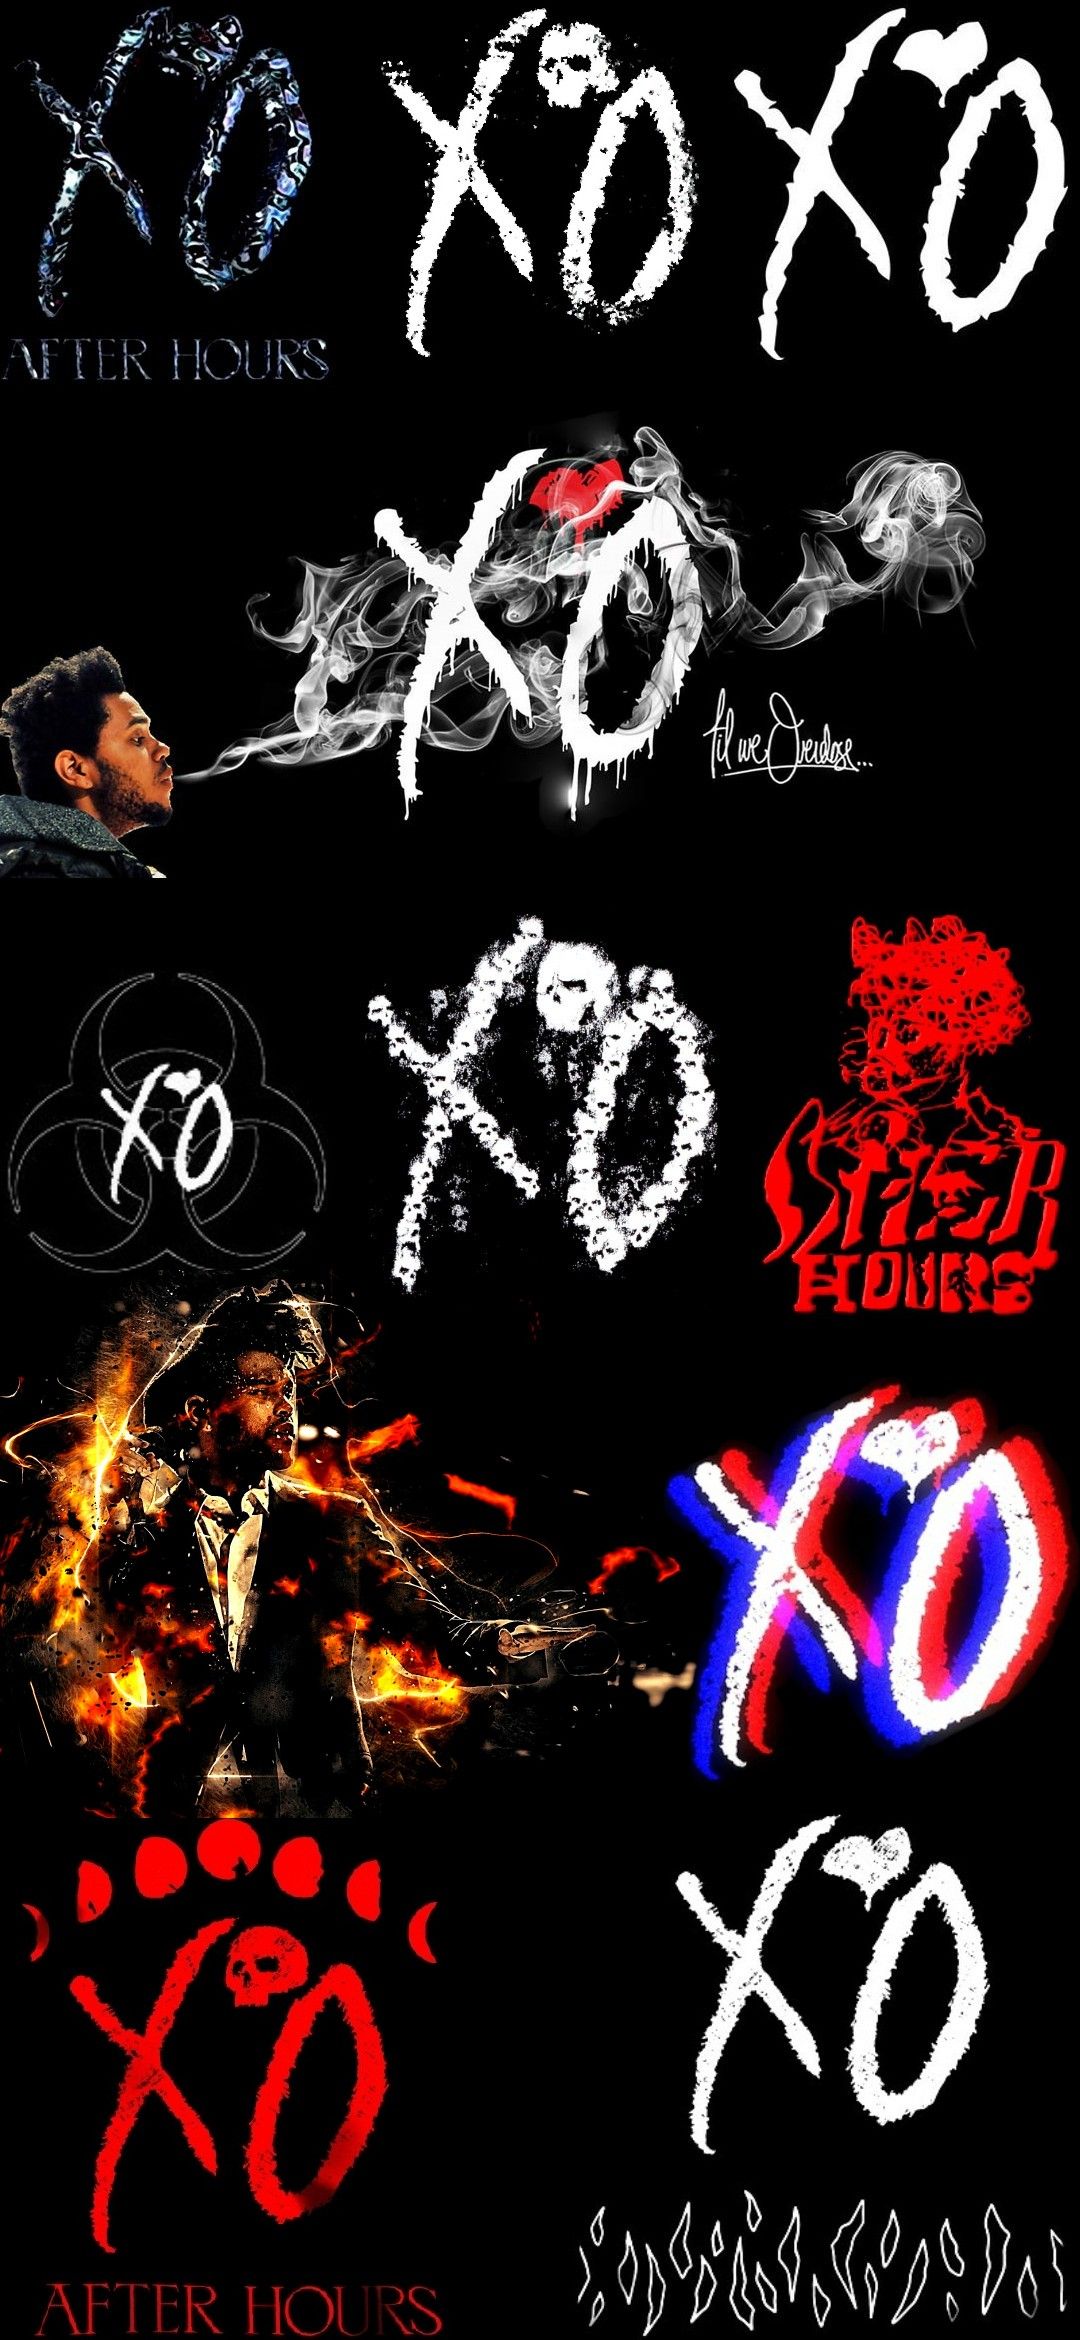 Custom The Weeknd wallpaper. Made by using multiple XO logo designs :)